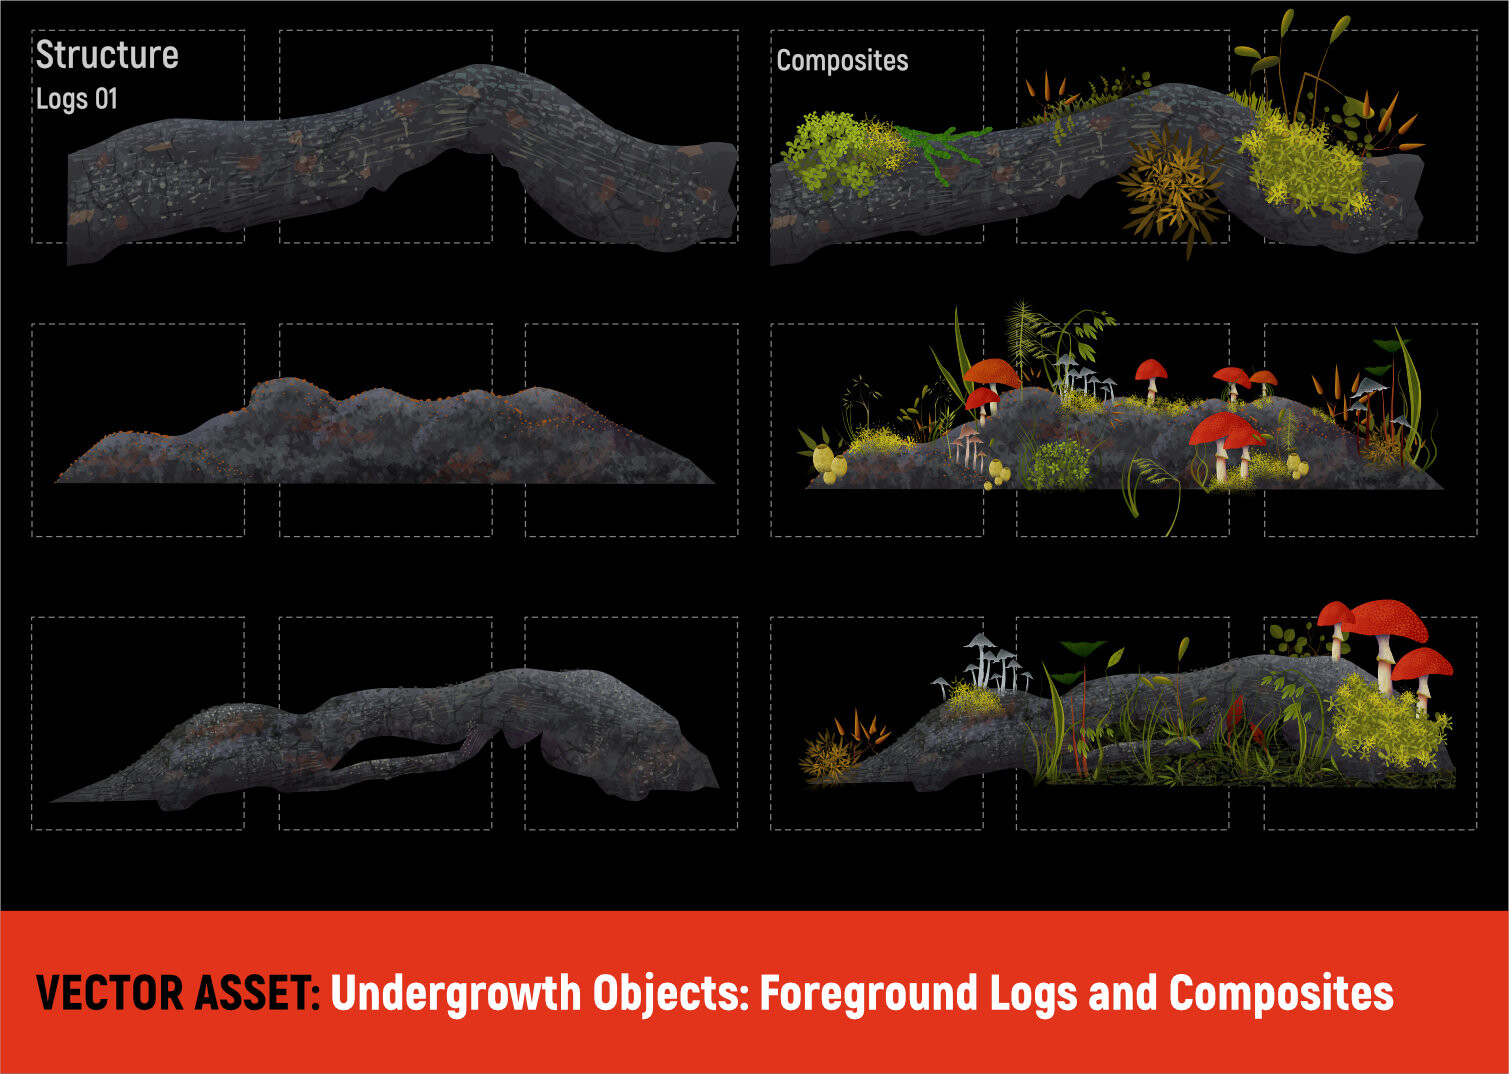 Undergrowth Vector Objects
Foreground Logs and Composites